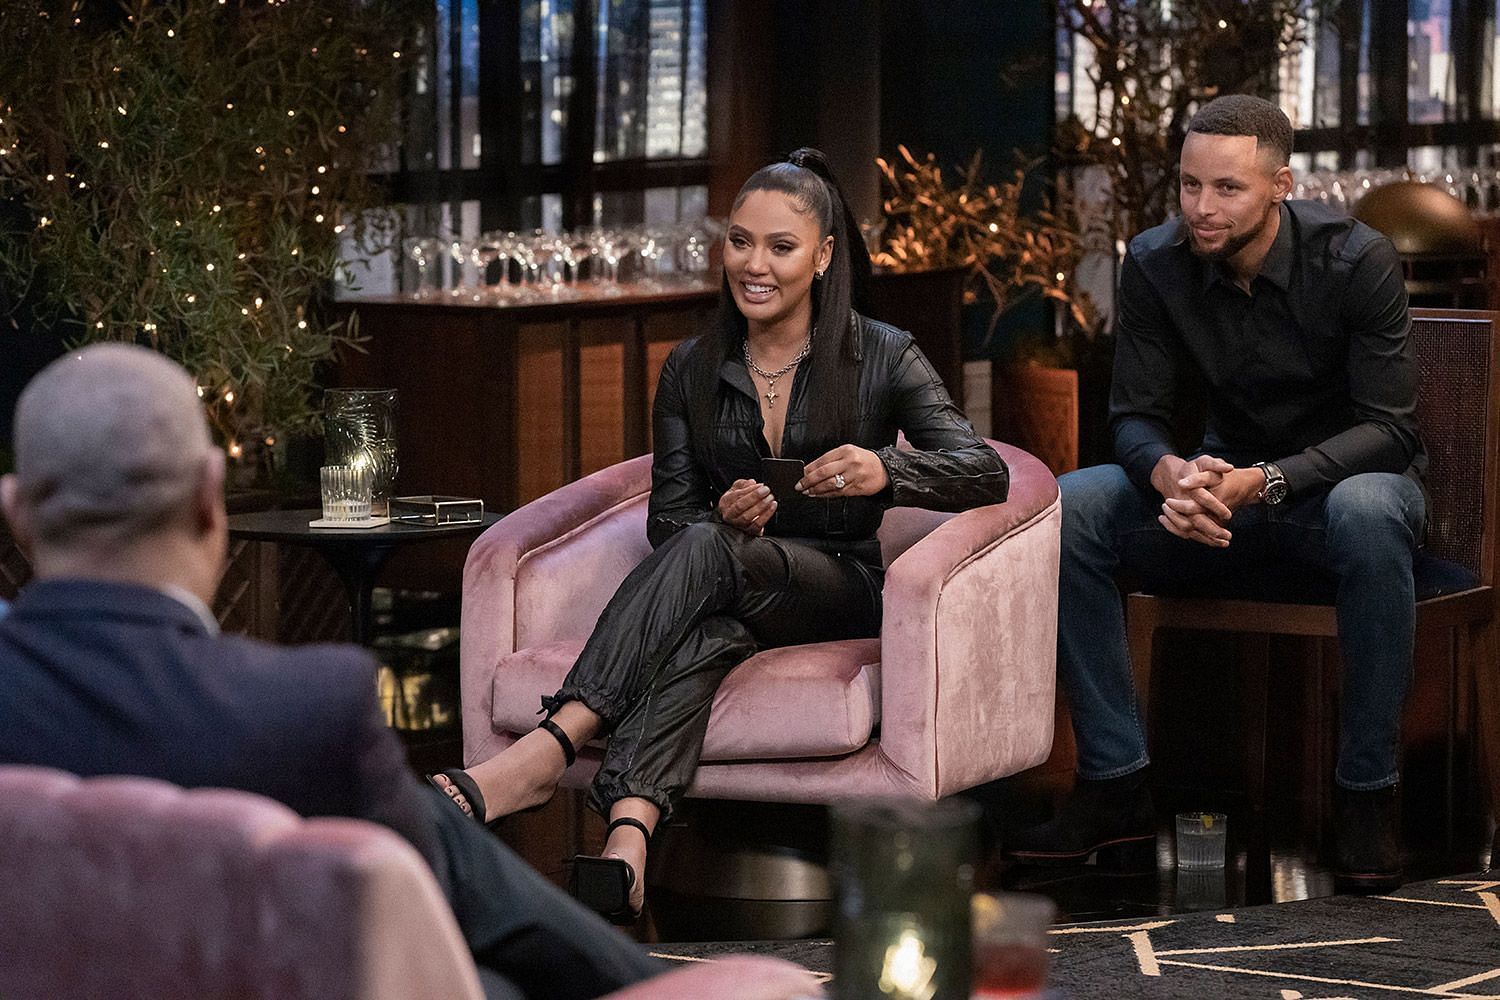 Ayesha and Steph Curry on their new game show on HBO. (Photo: Courtesy of People.com)